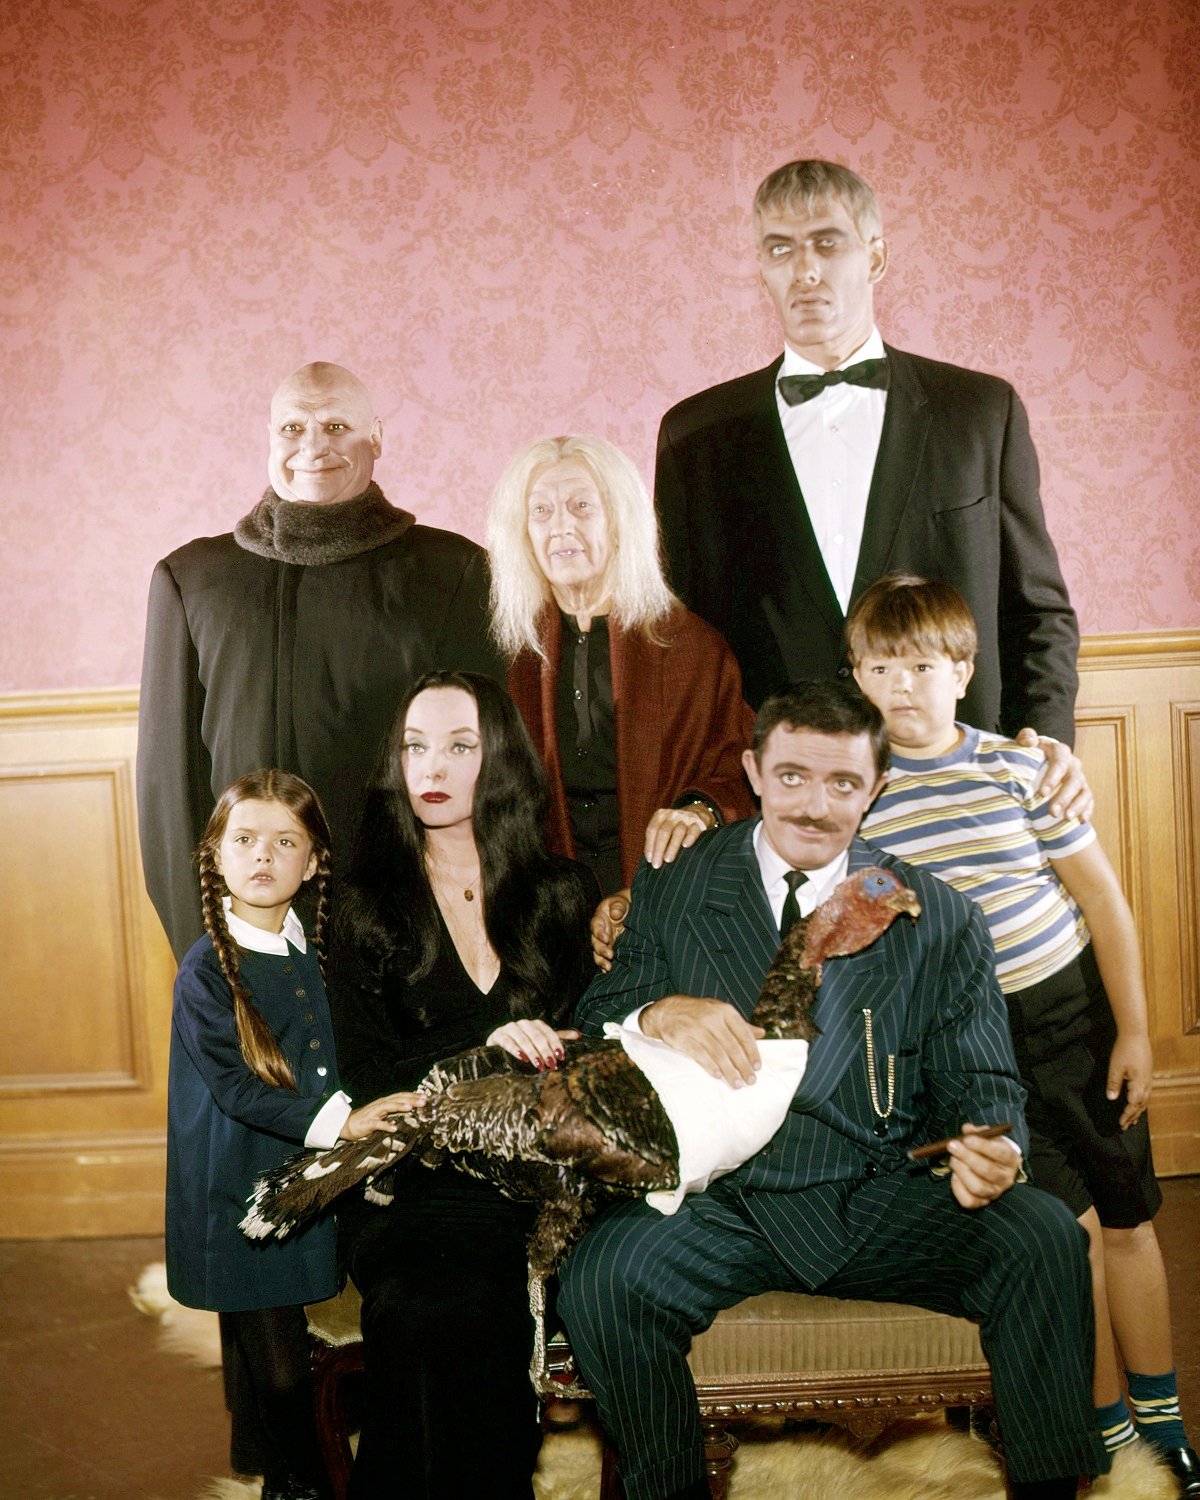 Jackie Coogan as Uncle Fester, Blossom Rock as Grandmama Addams, Ted Cassidy as Lurch. Lisa Loring as Wednesday Addams, Carolyn Jones as Morticia Addams, John Astin as Gomez Addams, and Ken Weatherwax as Pugsley Addams in a promotional photo for 'The Addams Family'